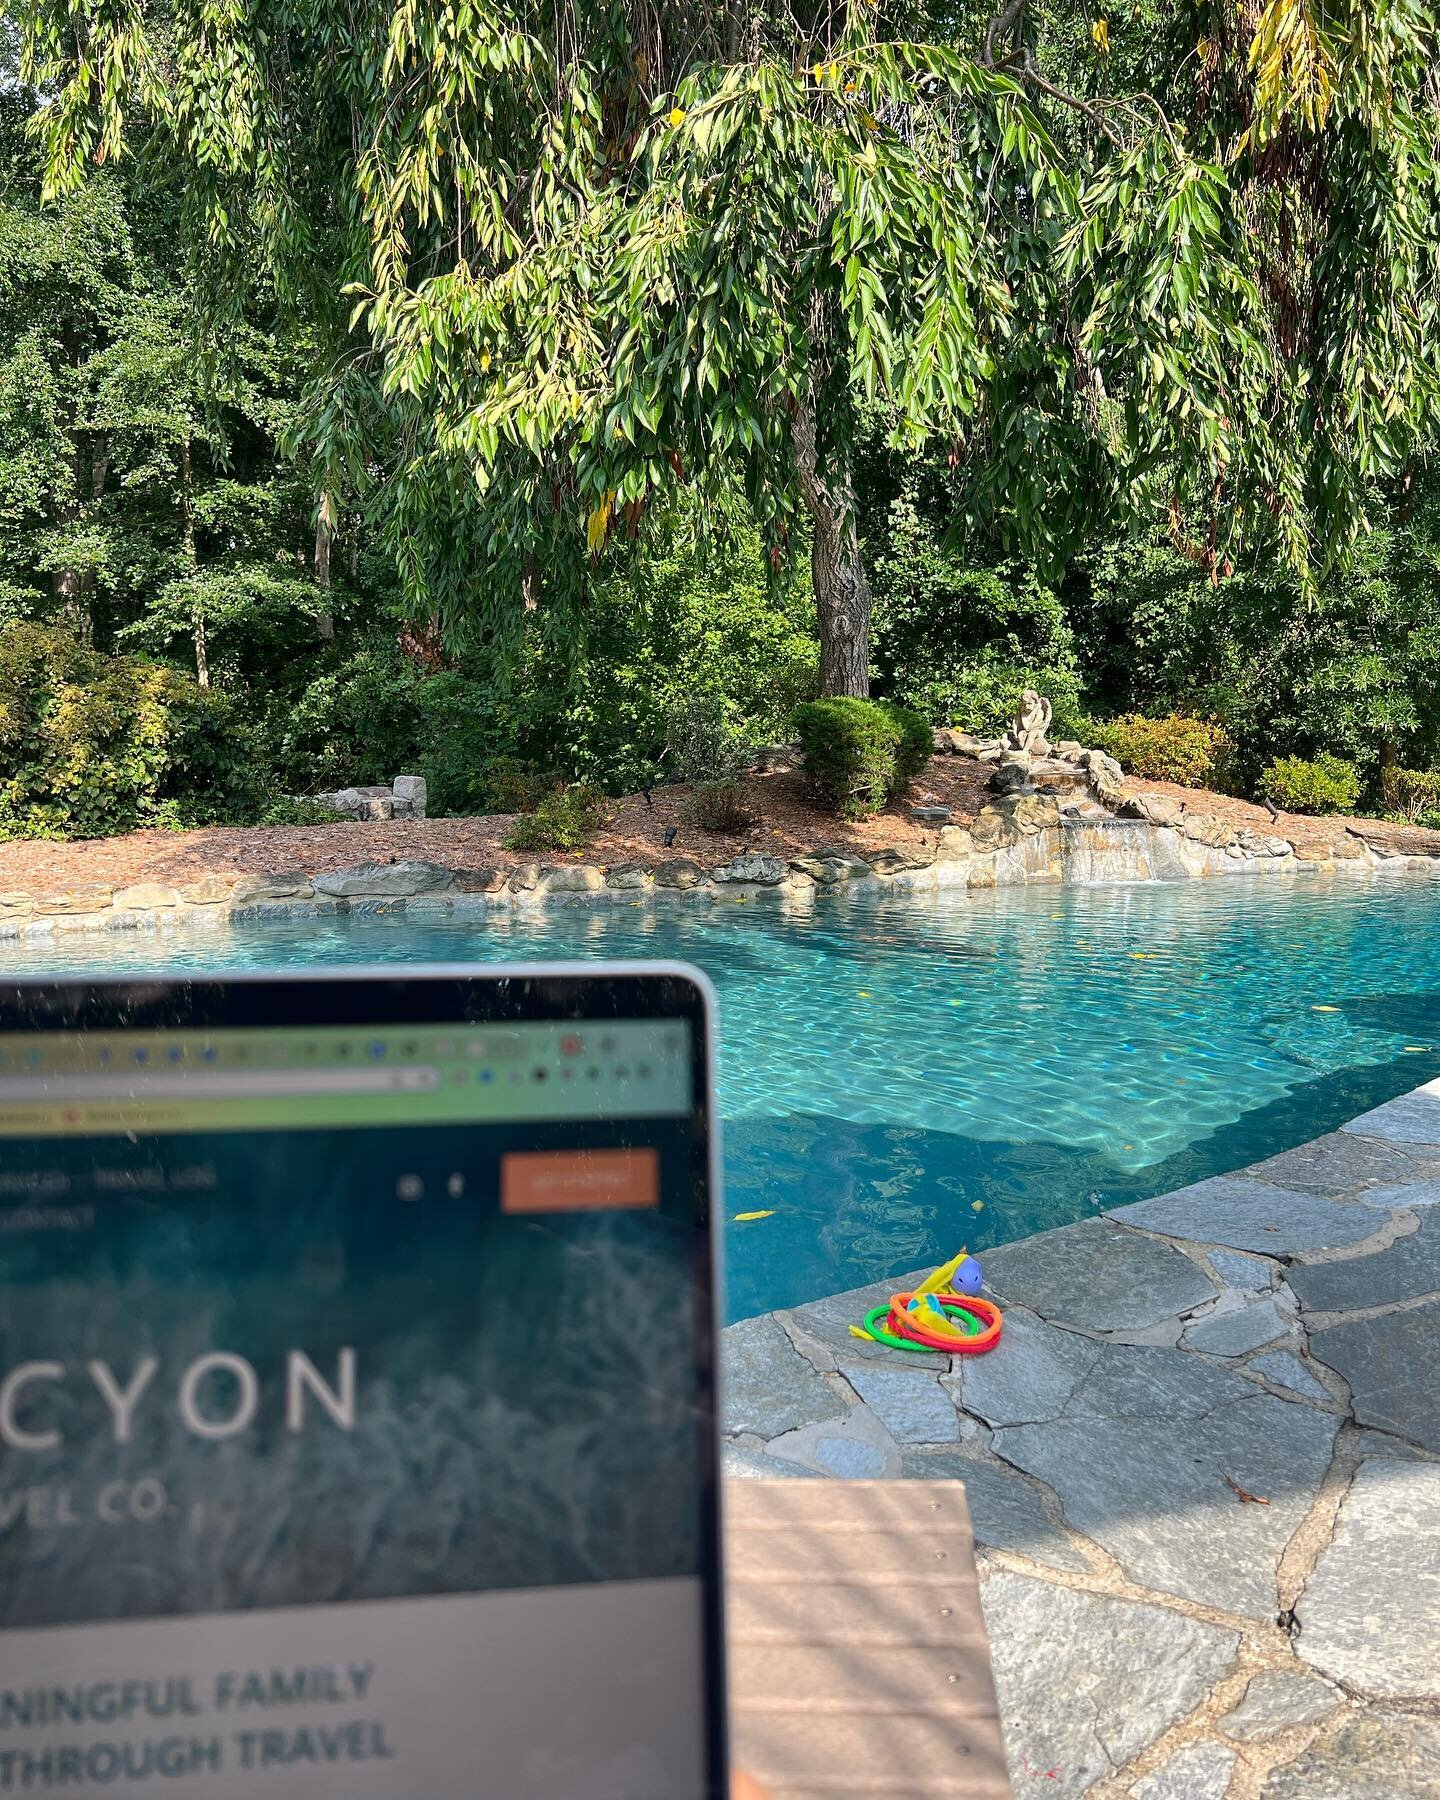 Is it weird that working from an office feels a little &ldquo;old school&rdquo; now? Life sure has changed&hellip; 
We spent the long Labor Day weekend relaxing with family and enjoying the last days of summer. I was also able to catch up on a few pr